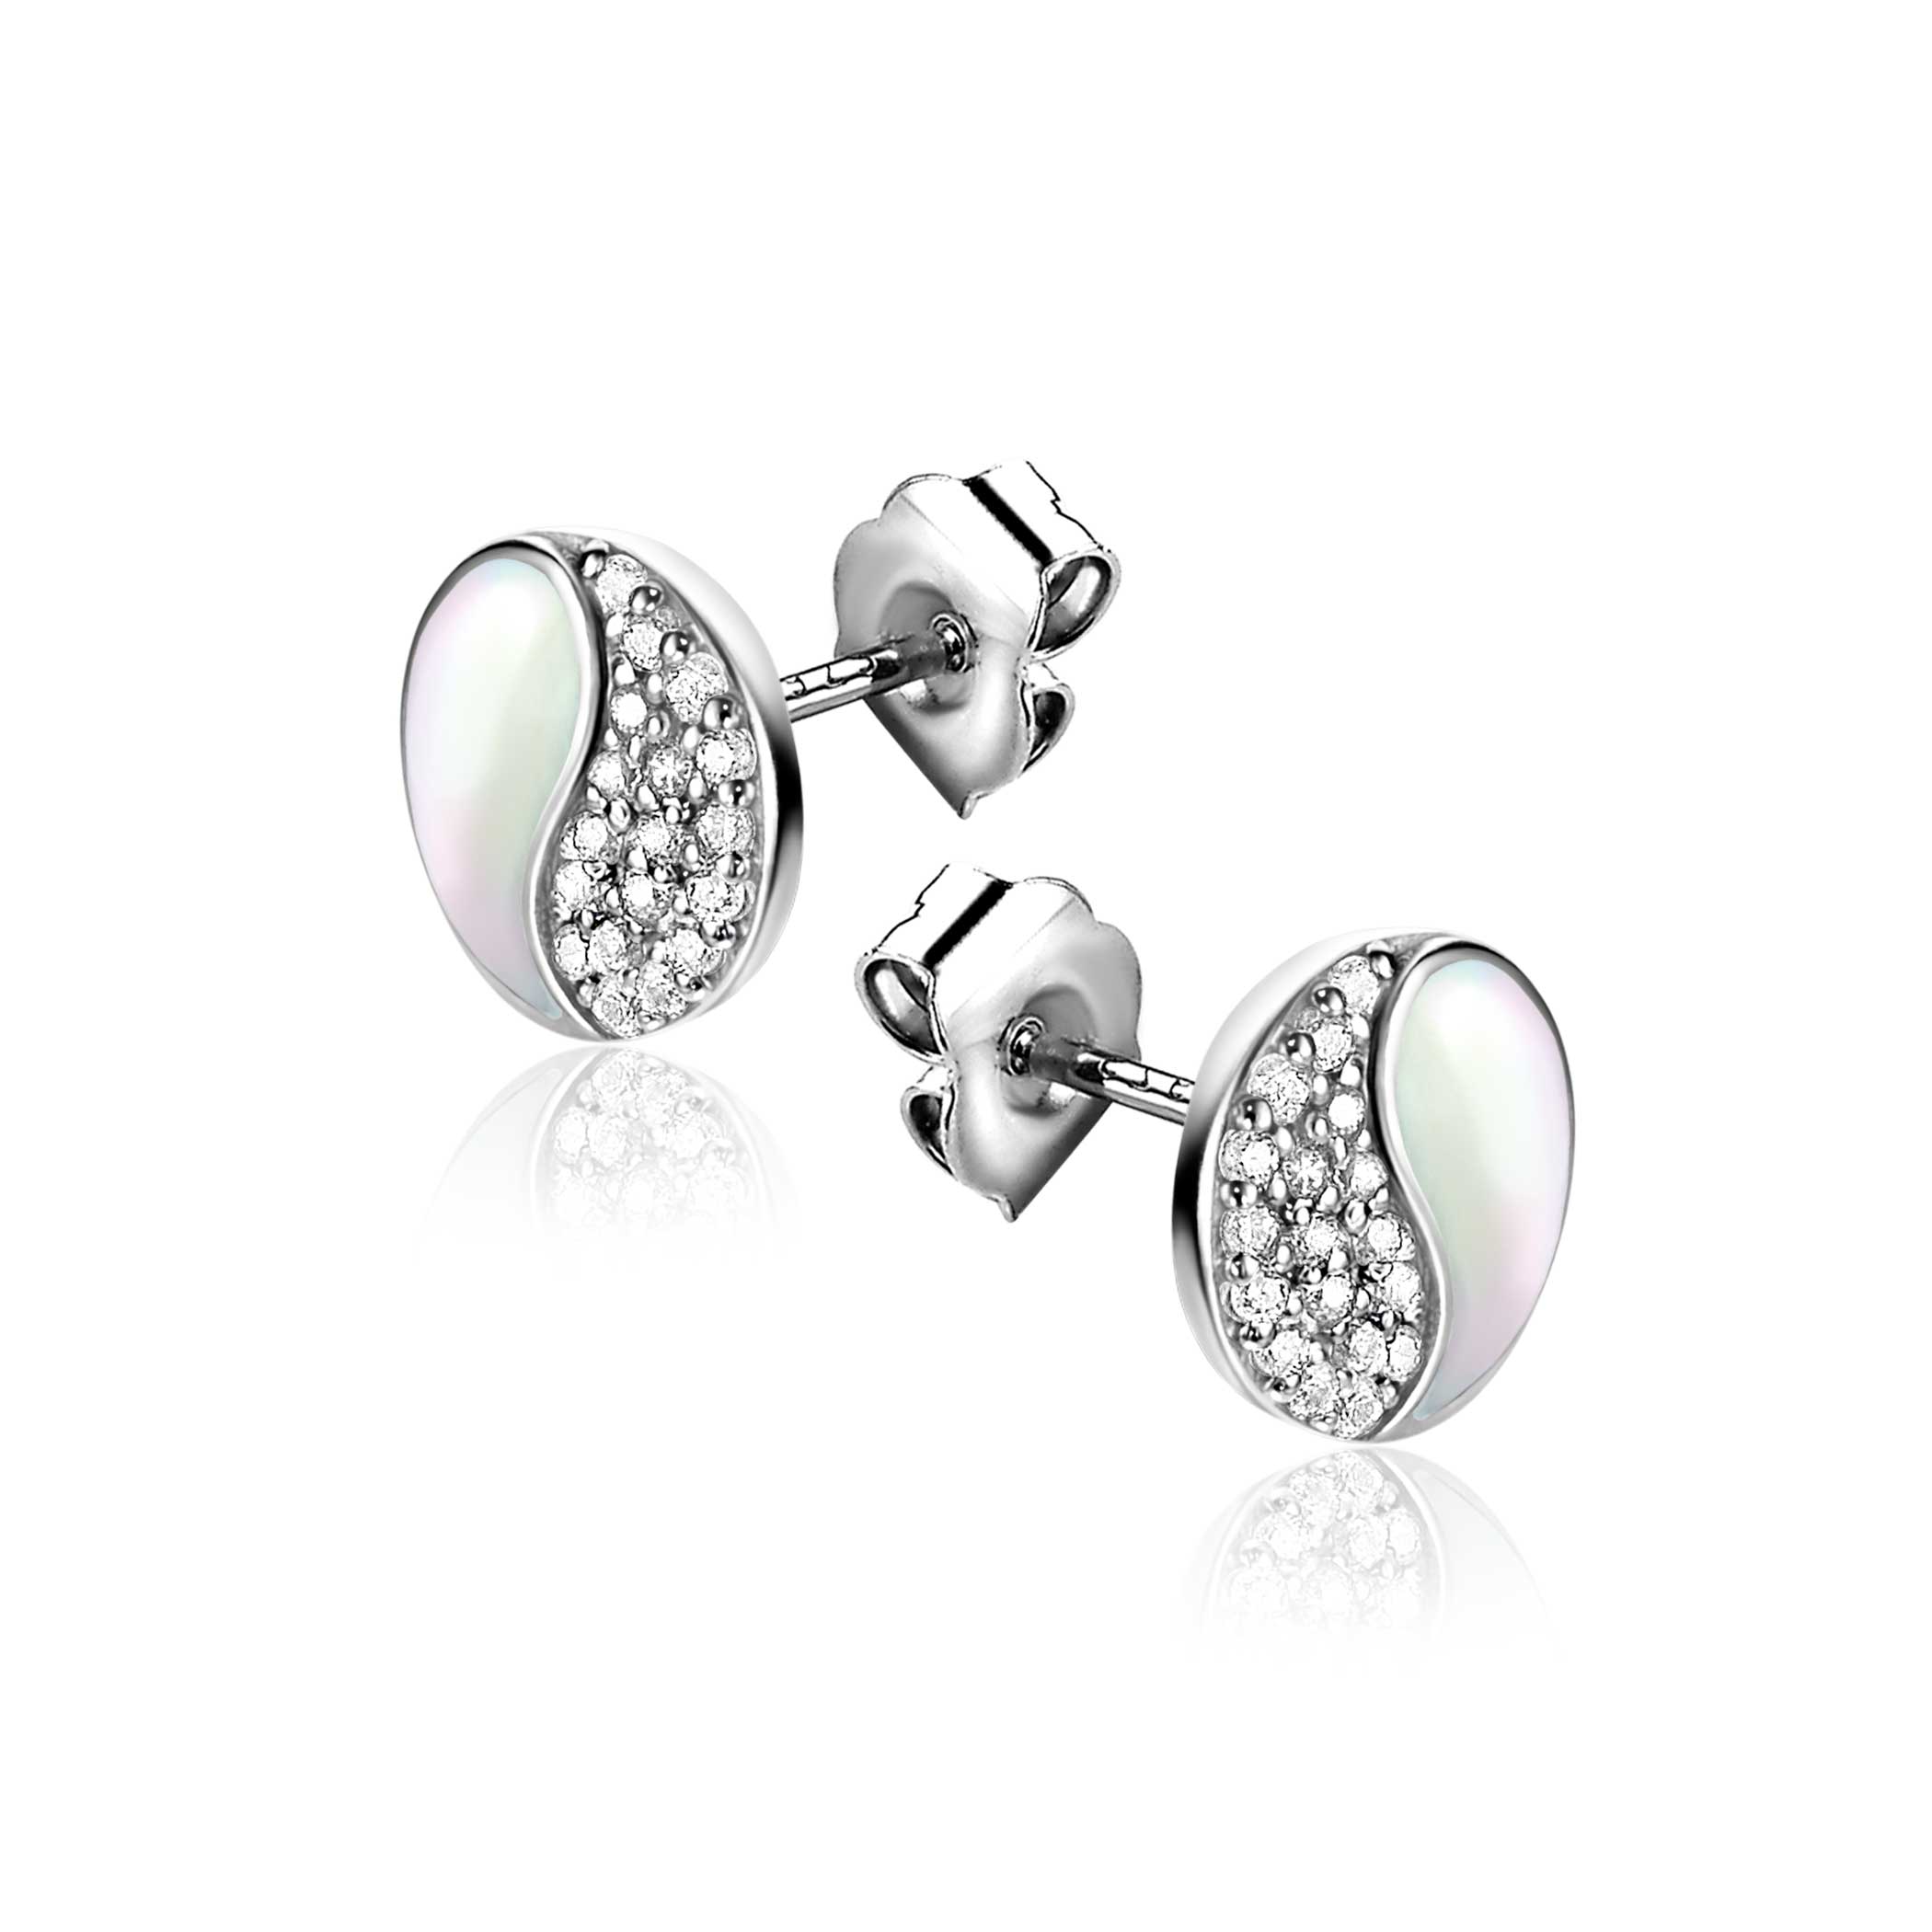 9mm ZINZI Sterling Silver Yin Yang Stud Earrings Mother-of-Pearl and White Zirconias ZIO2423